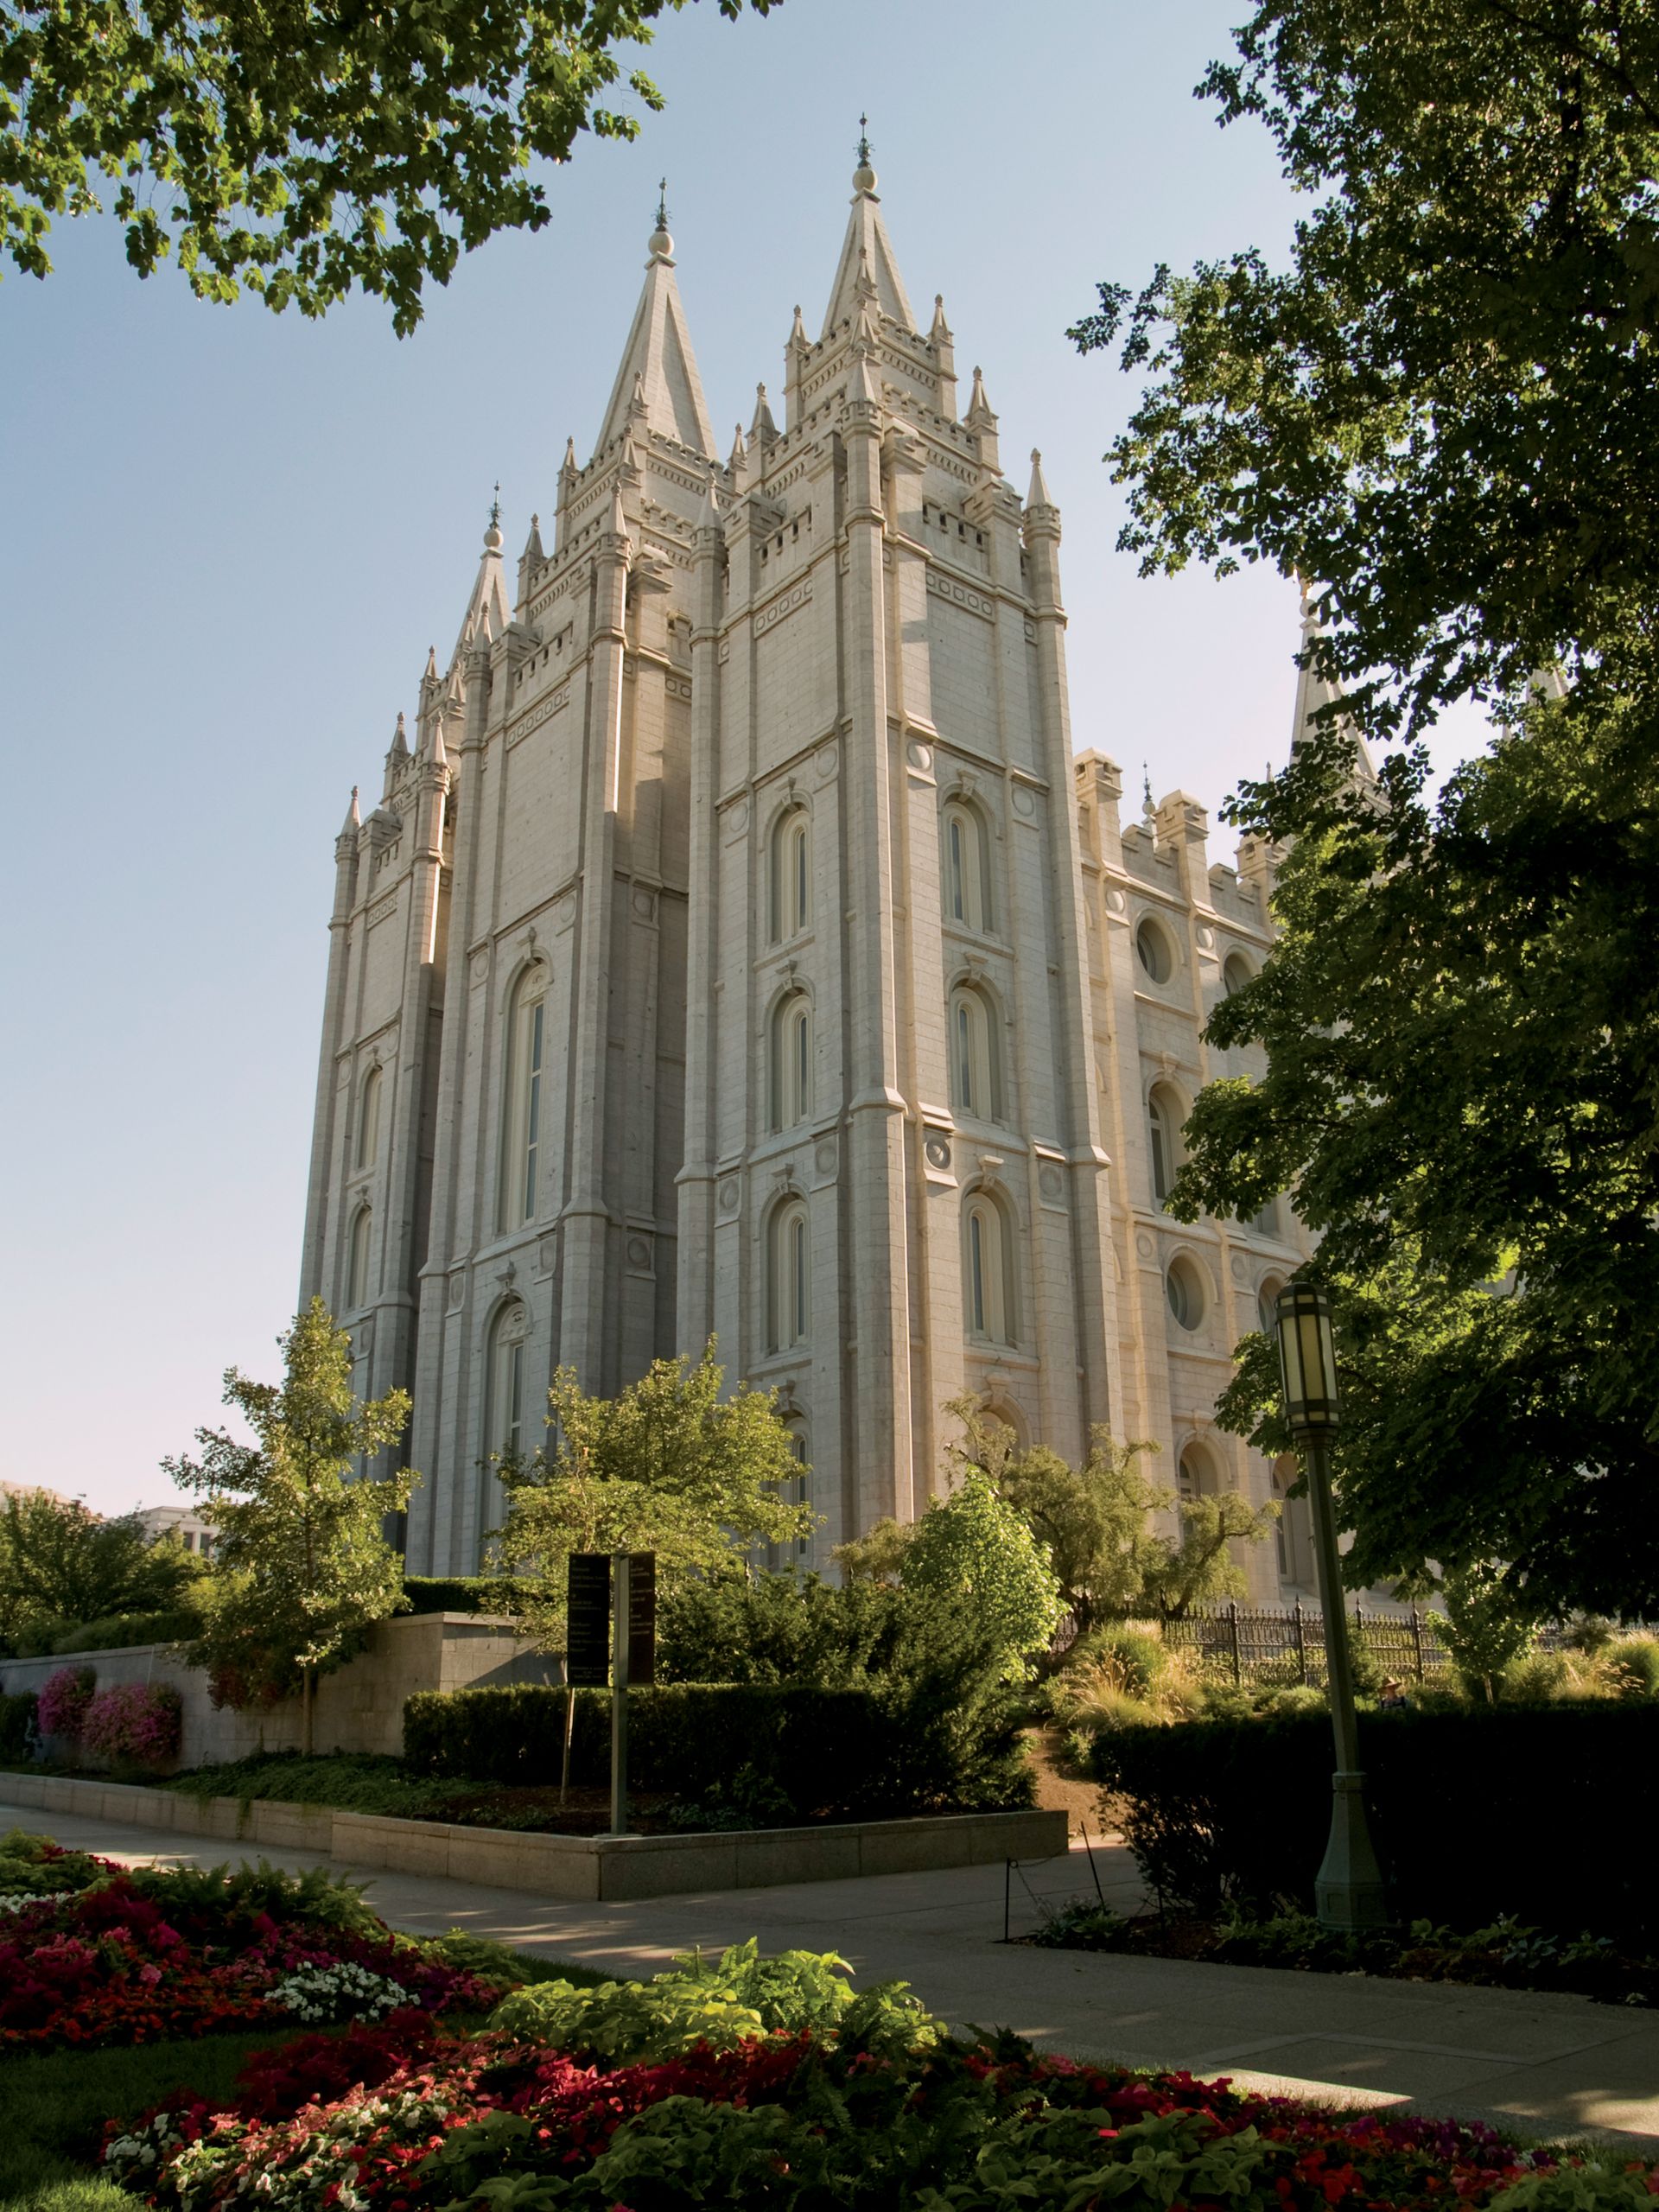 The Salt Lake Temple, including scenery.